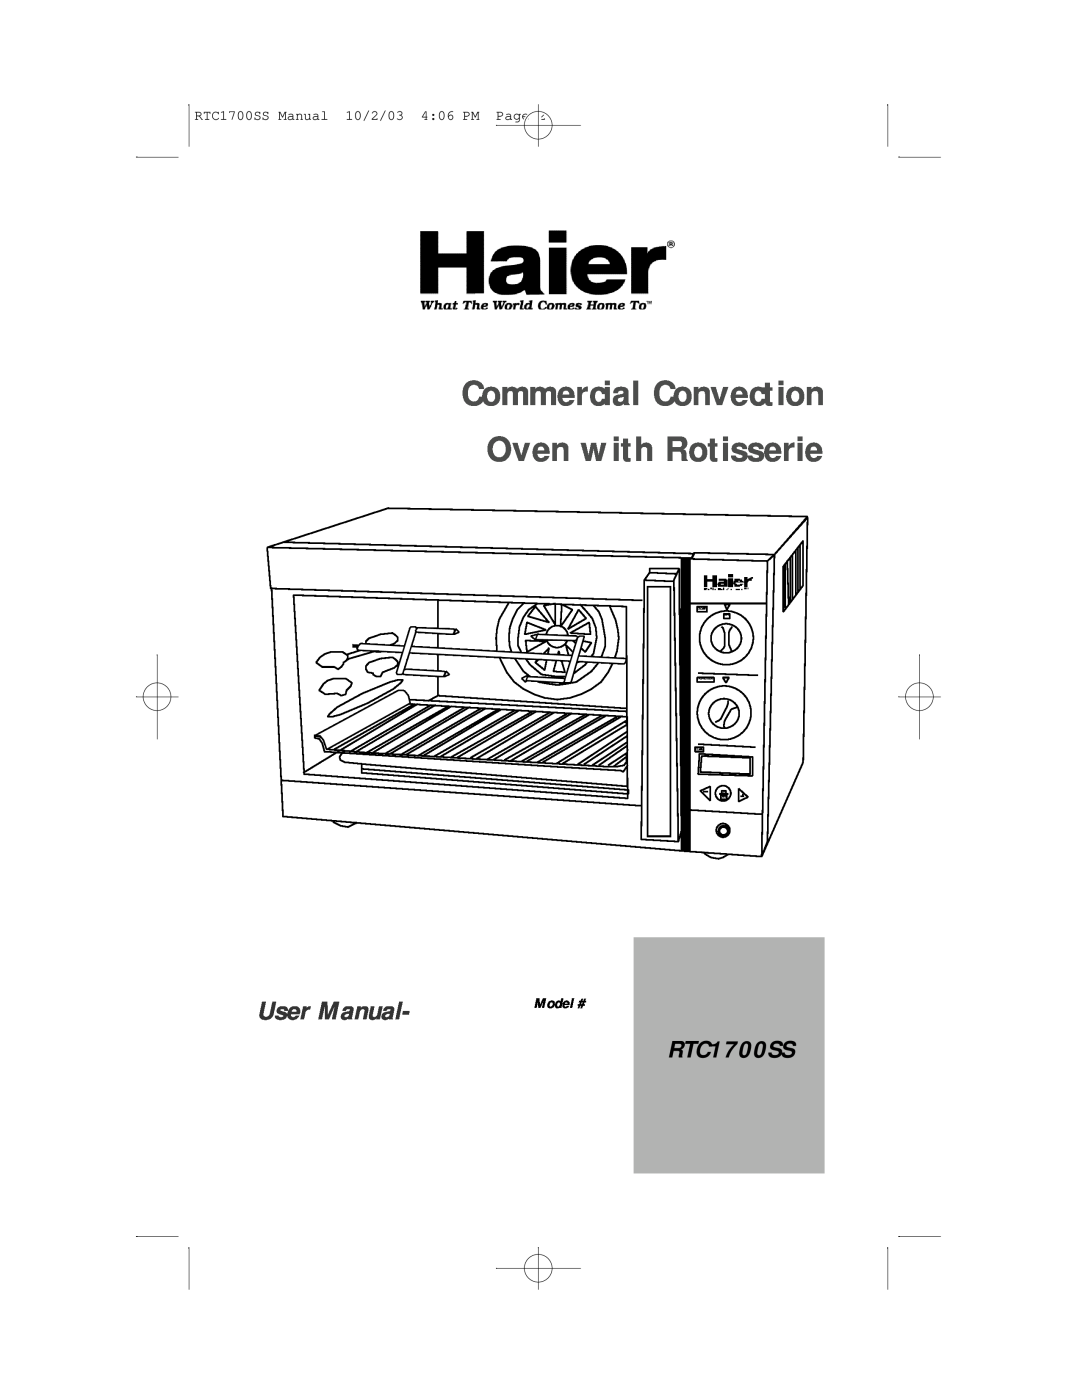 Haier RTC1700SS user manual Model #, Commercial Convection Oven with Rotisserie, User Manual, Temp, Function, Time 